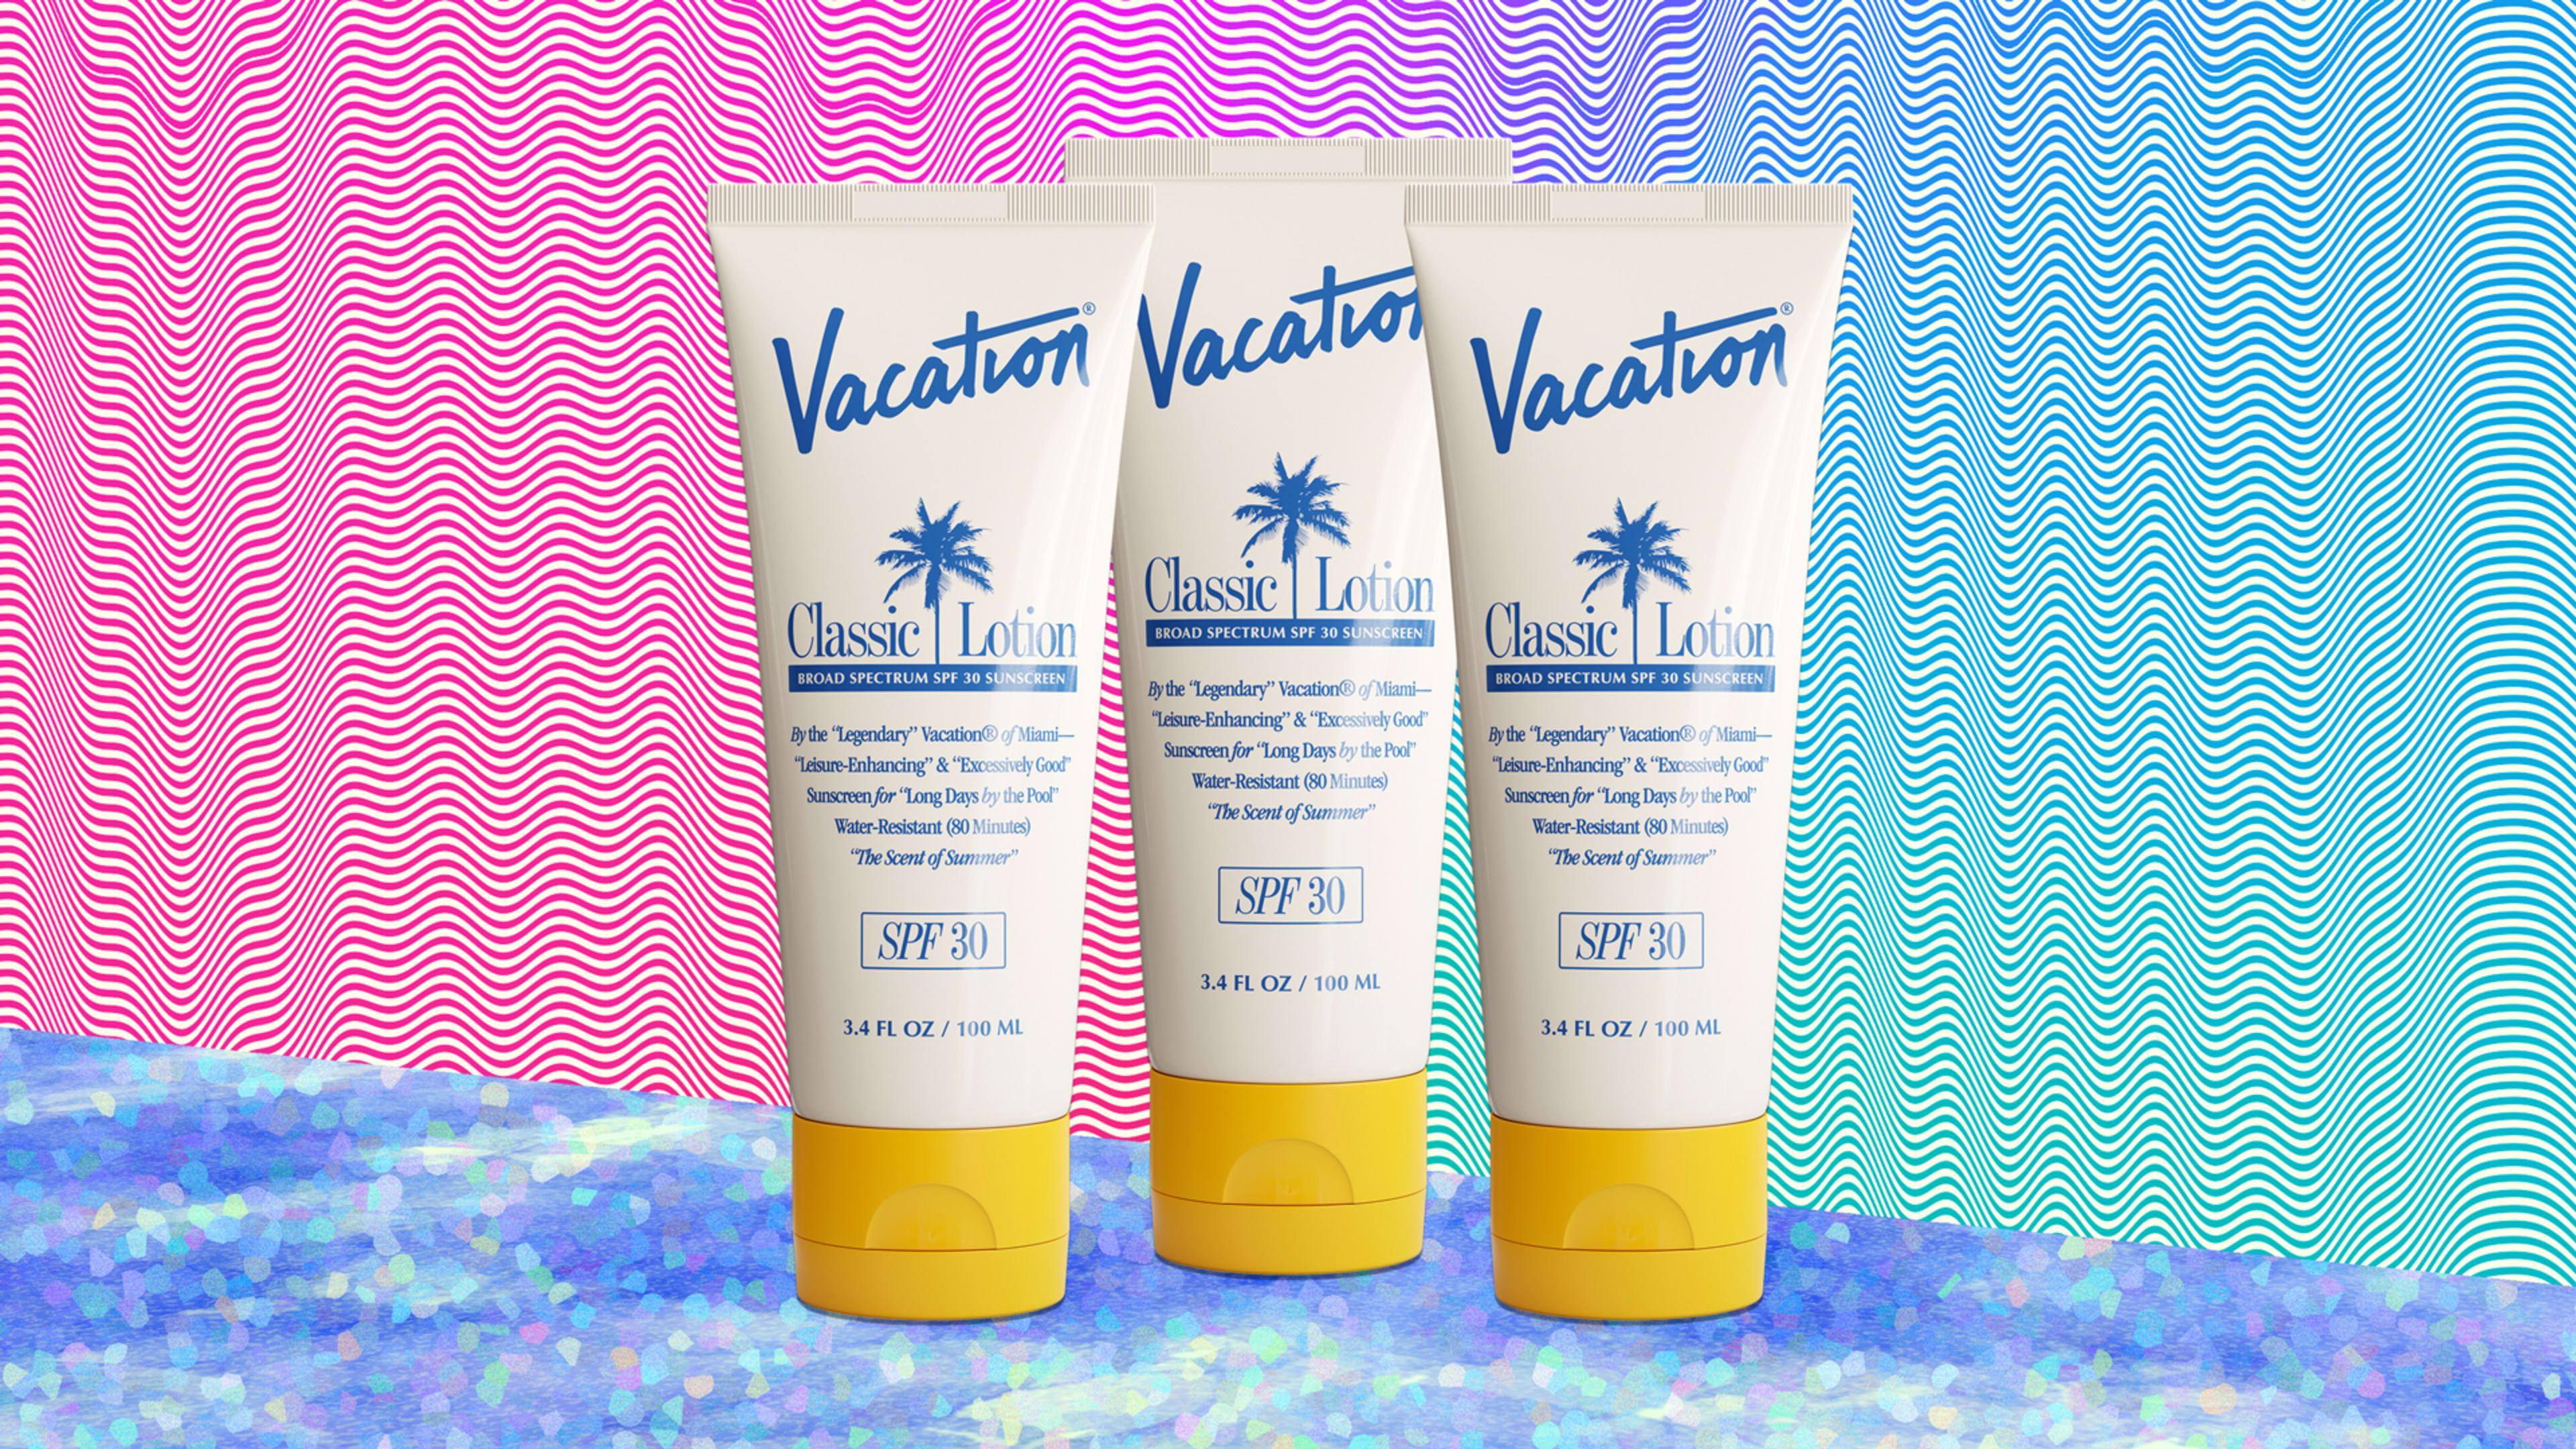 This new sunscreen brand smells amazing—and has a hilarious, throwback website that will take you back to summer 1997